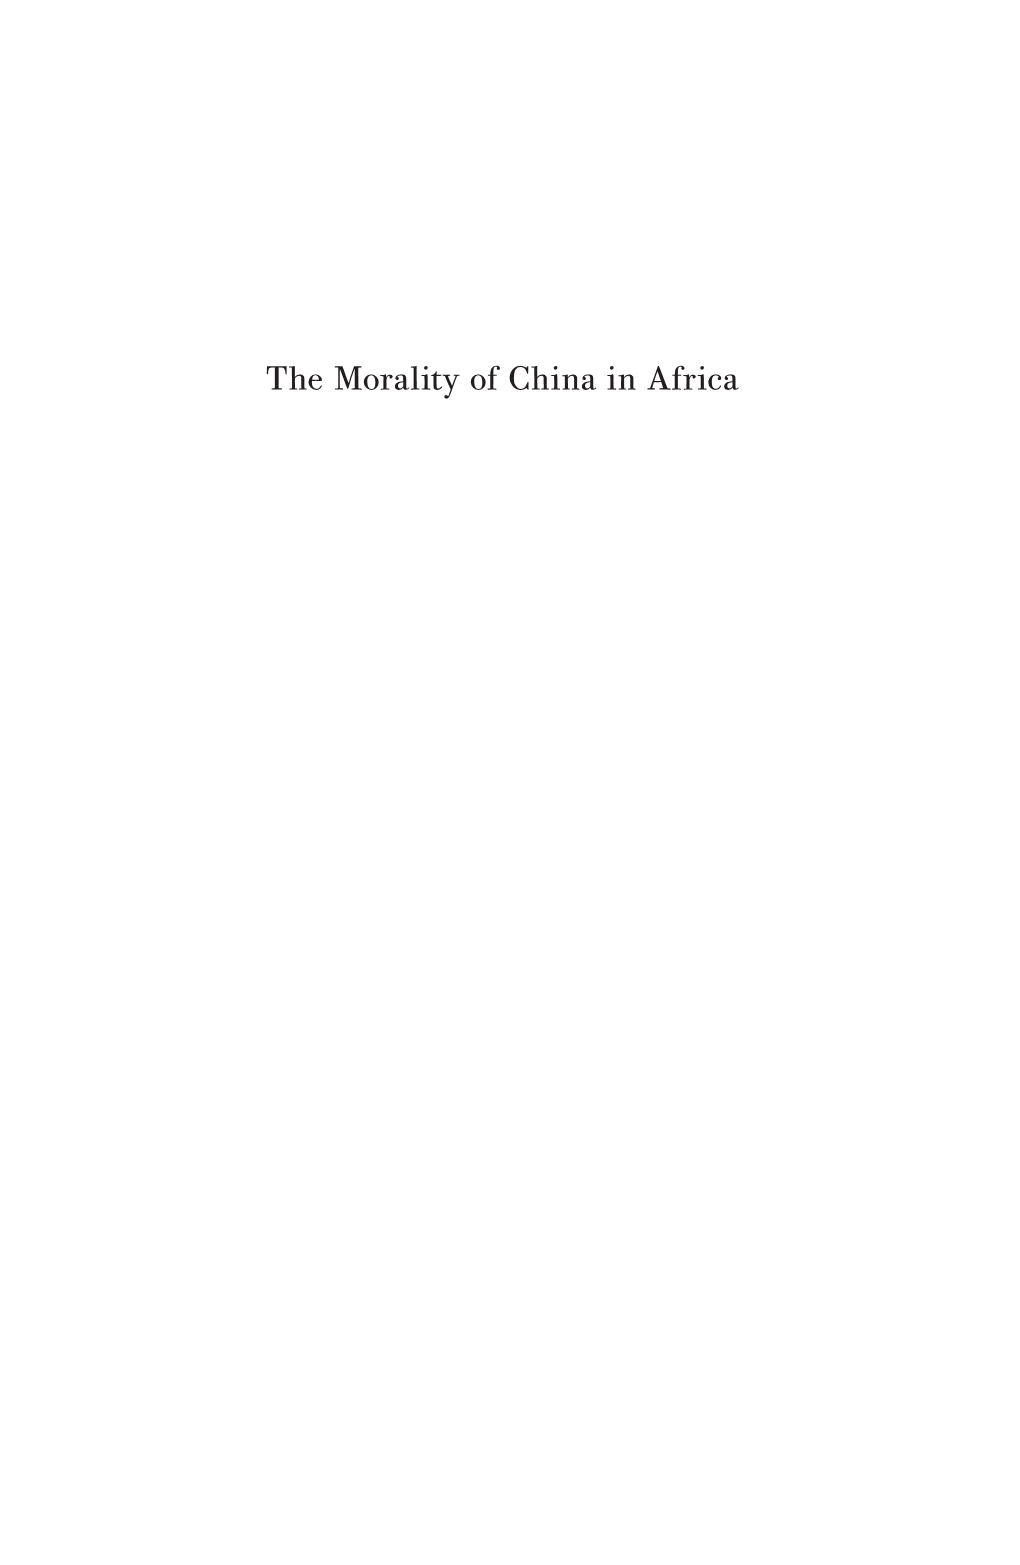 The Morality of China in Africa About the Editor